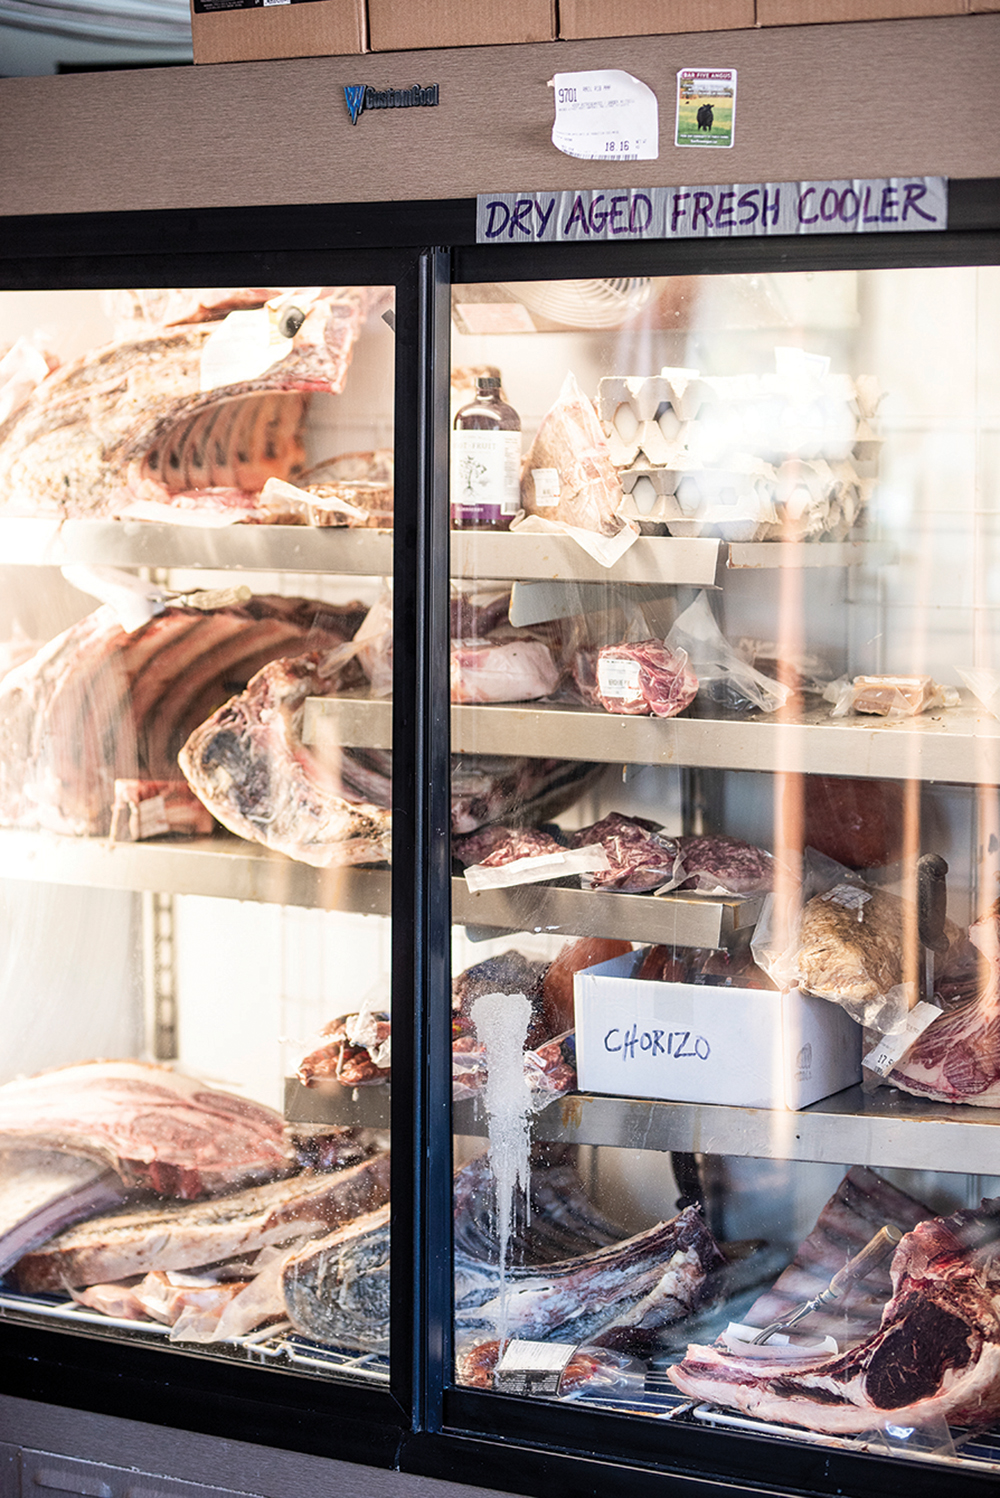 Sean Kelly, owner of Black Angus Fine Meats & Game in Craigleith, cuts meat to order and also offers a variety of frozen meats and prepared foods.